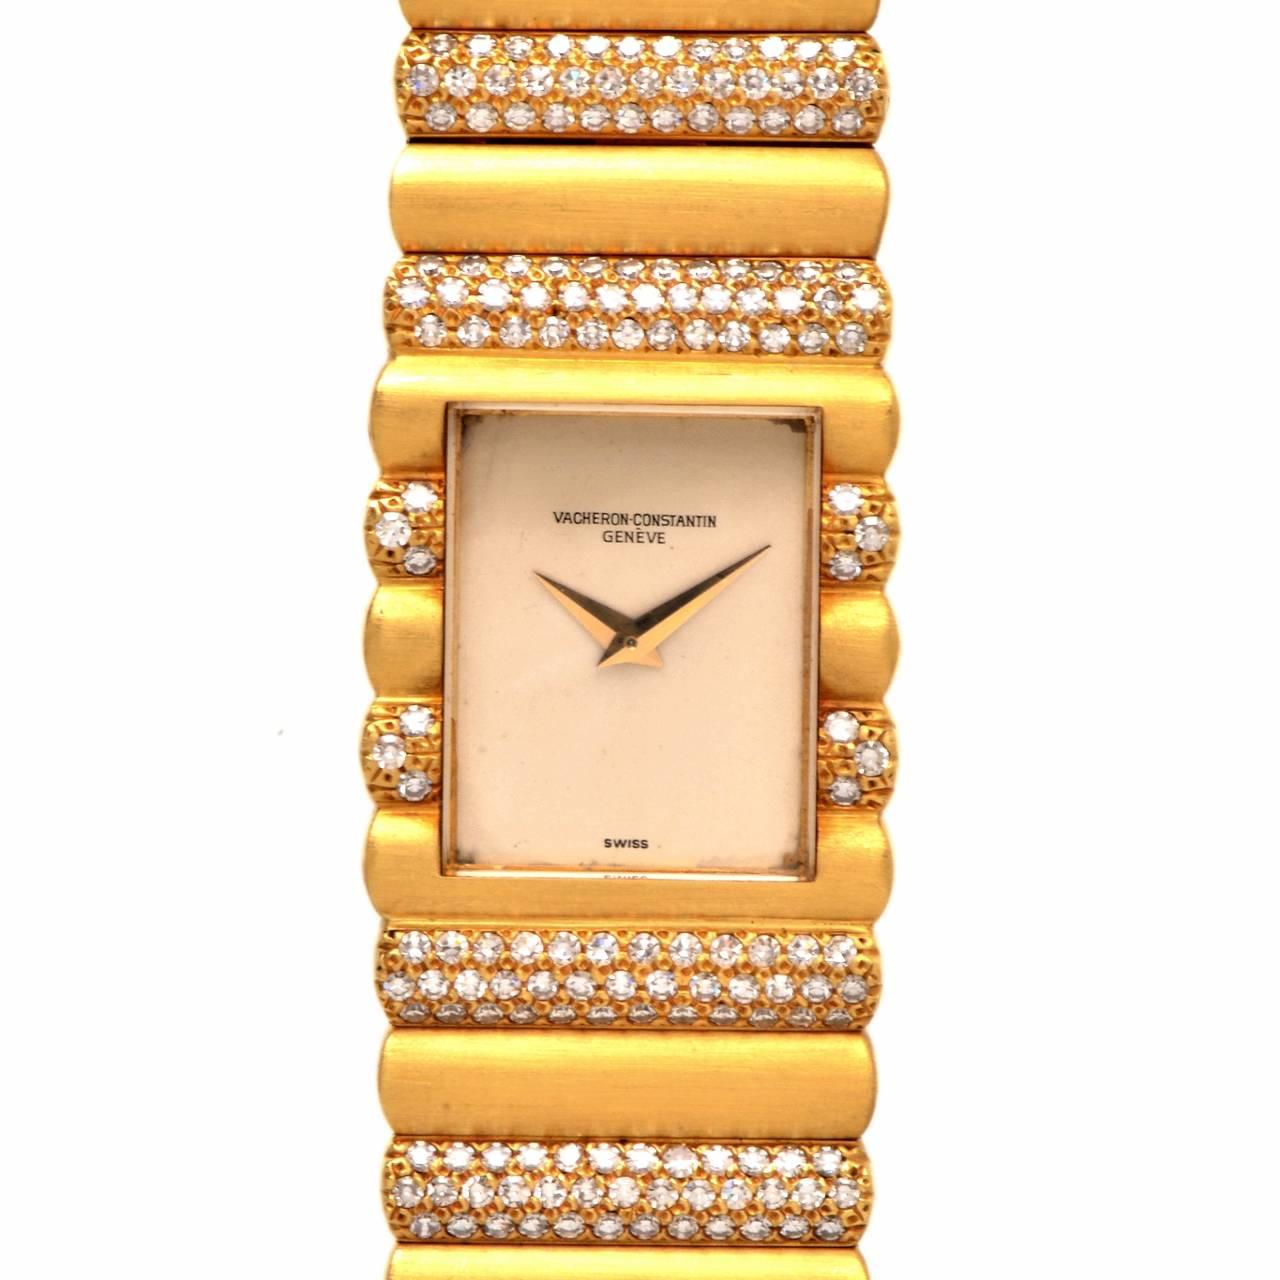 Vacheron Constantin unisex diamond 18k Gold watch REF 15006. 18k solid yellow gold case and bracelet with some 600 factory set genuine round diamonds approx.5.50 cuts High color, high clarity.

Vacheron Constantin Manual winding 22 jewels in